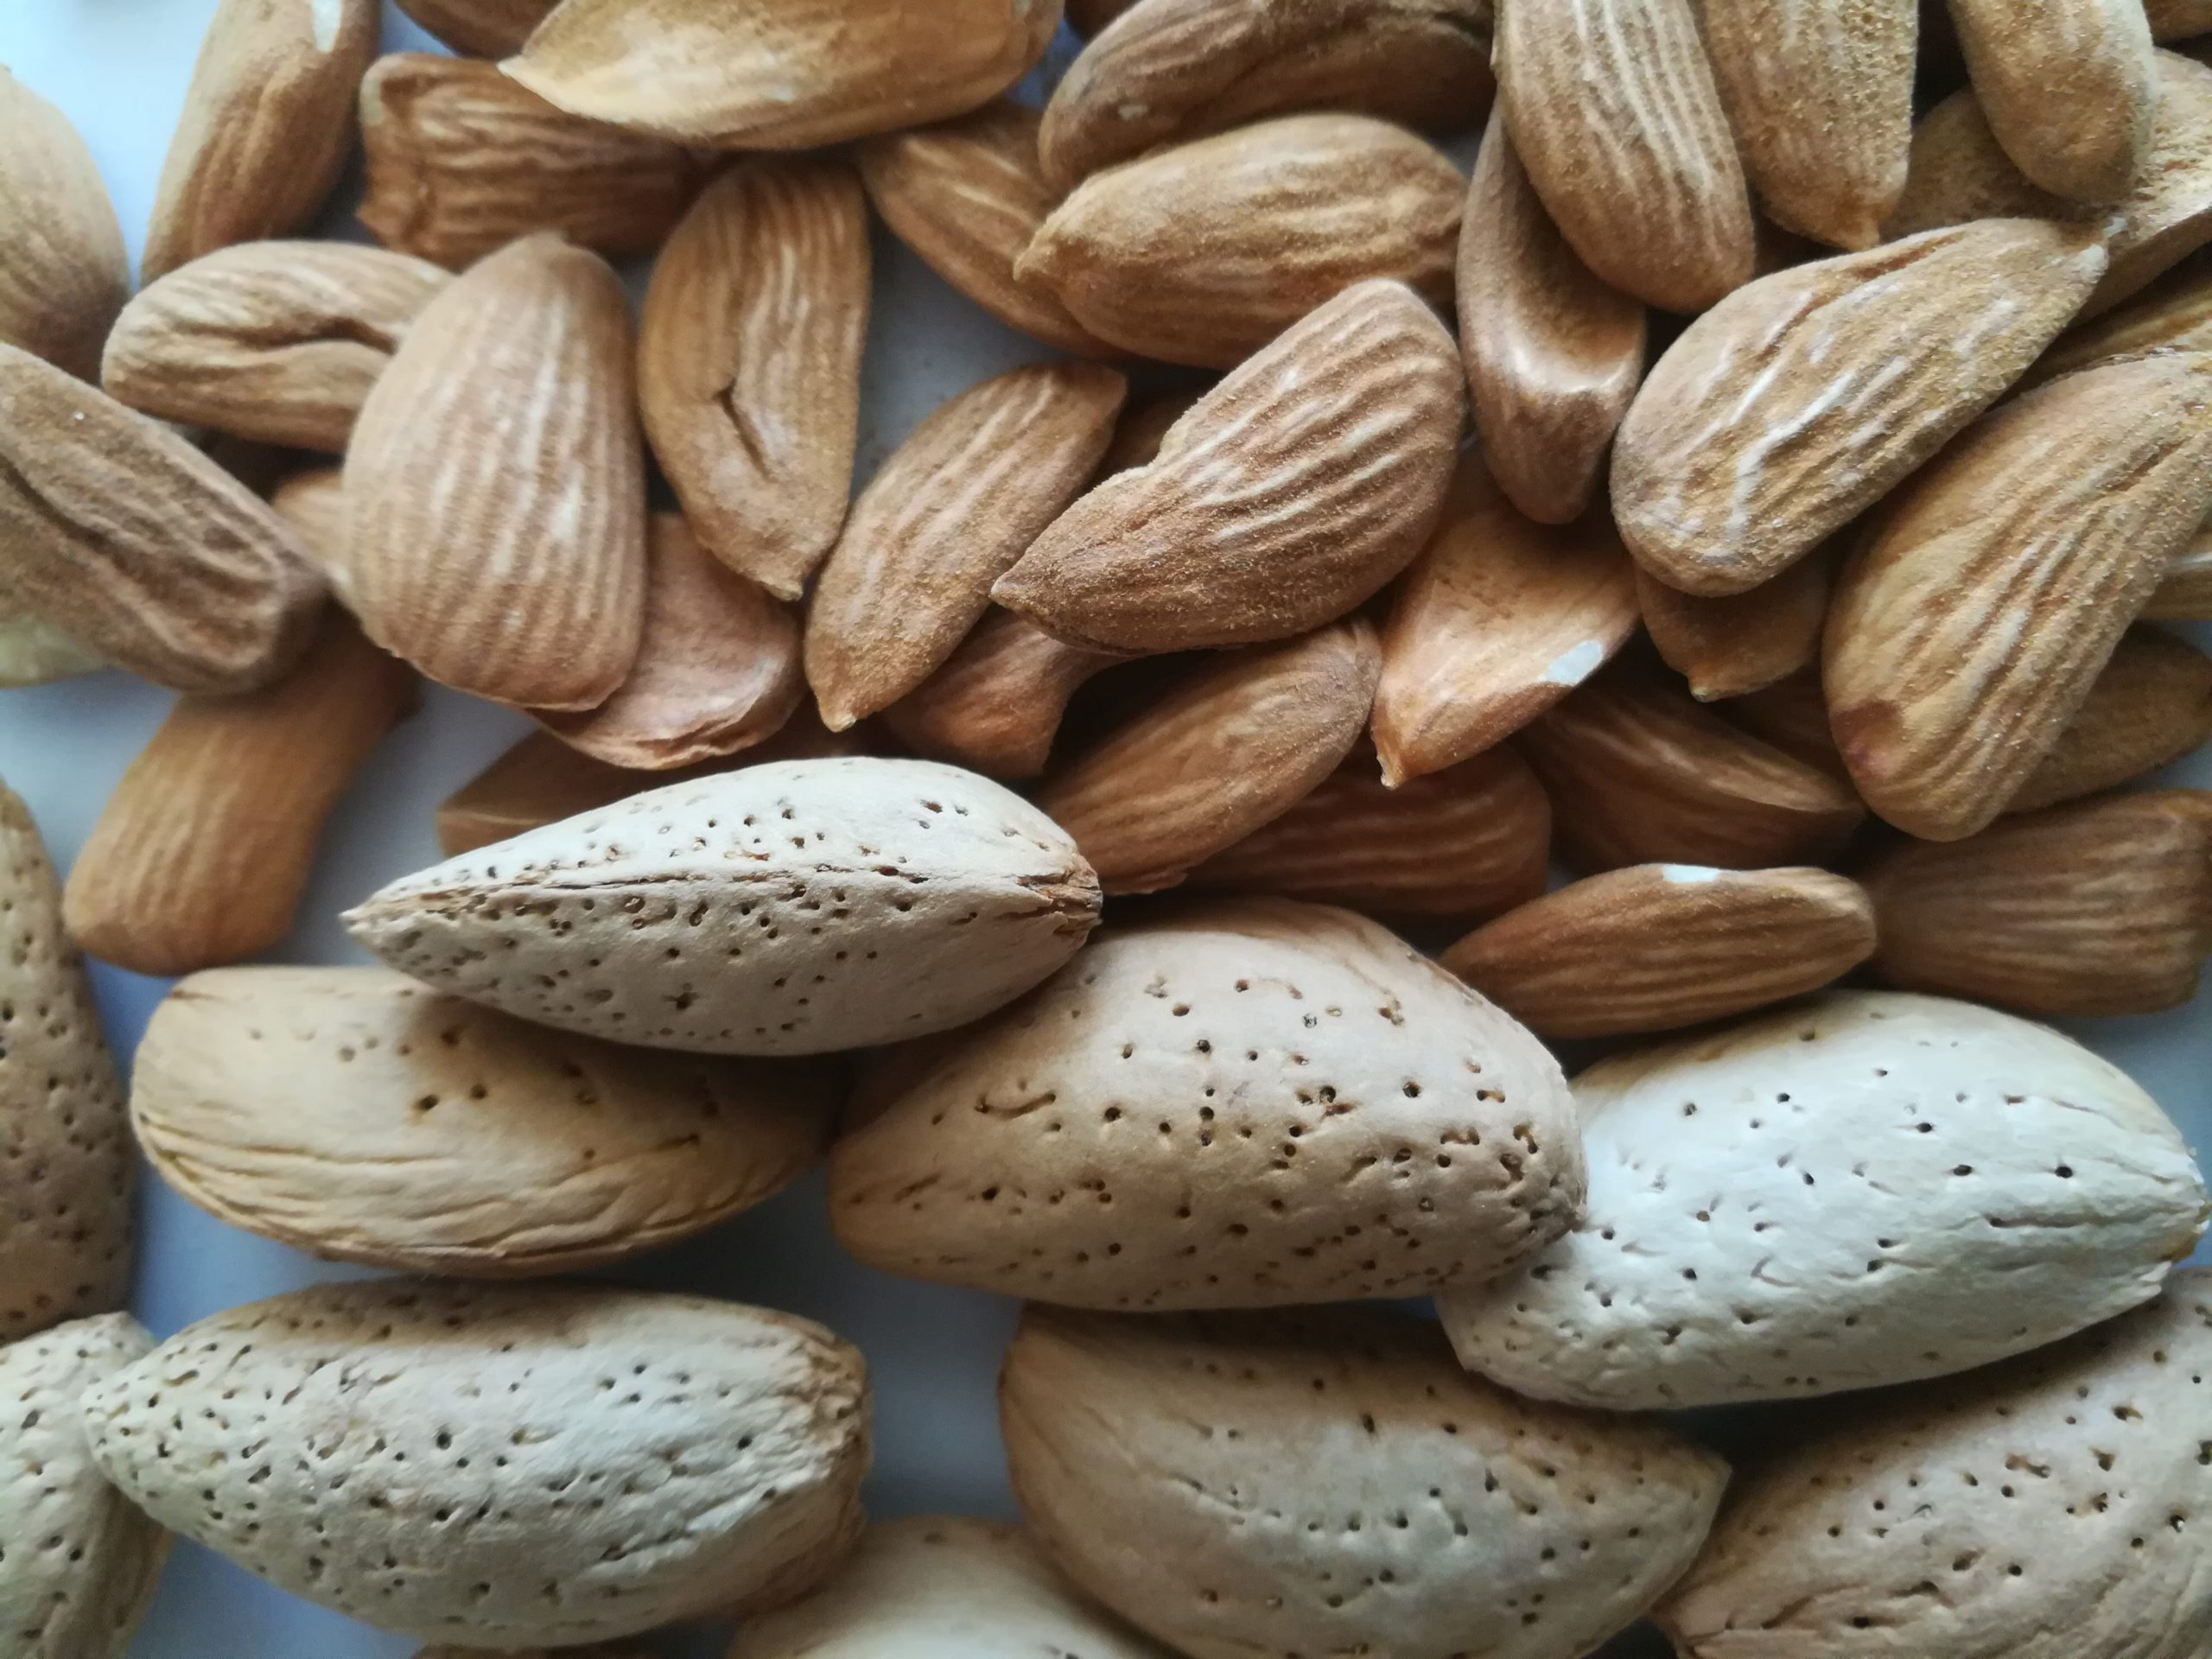 Best Iranian almonds for import | Nutex trading